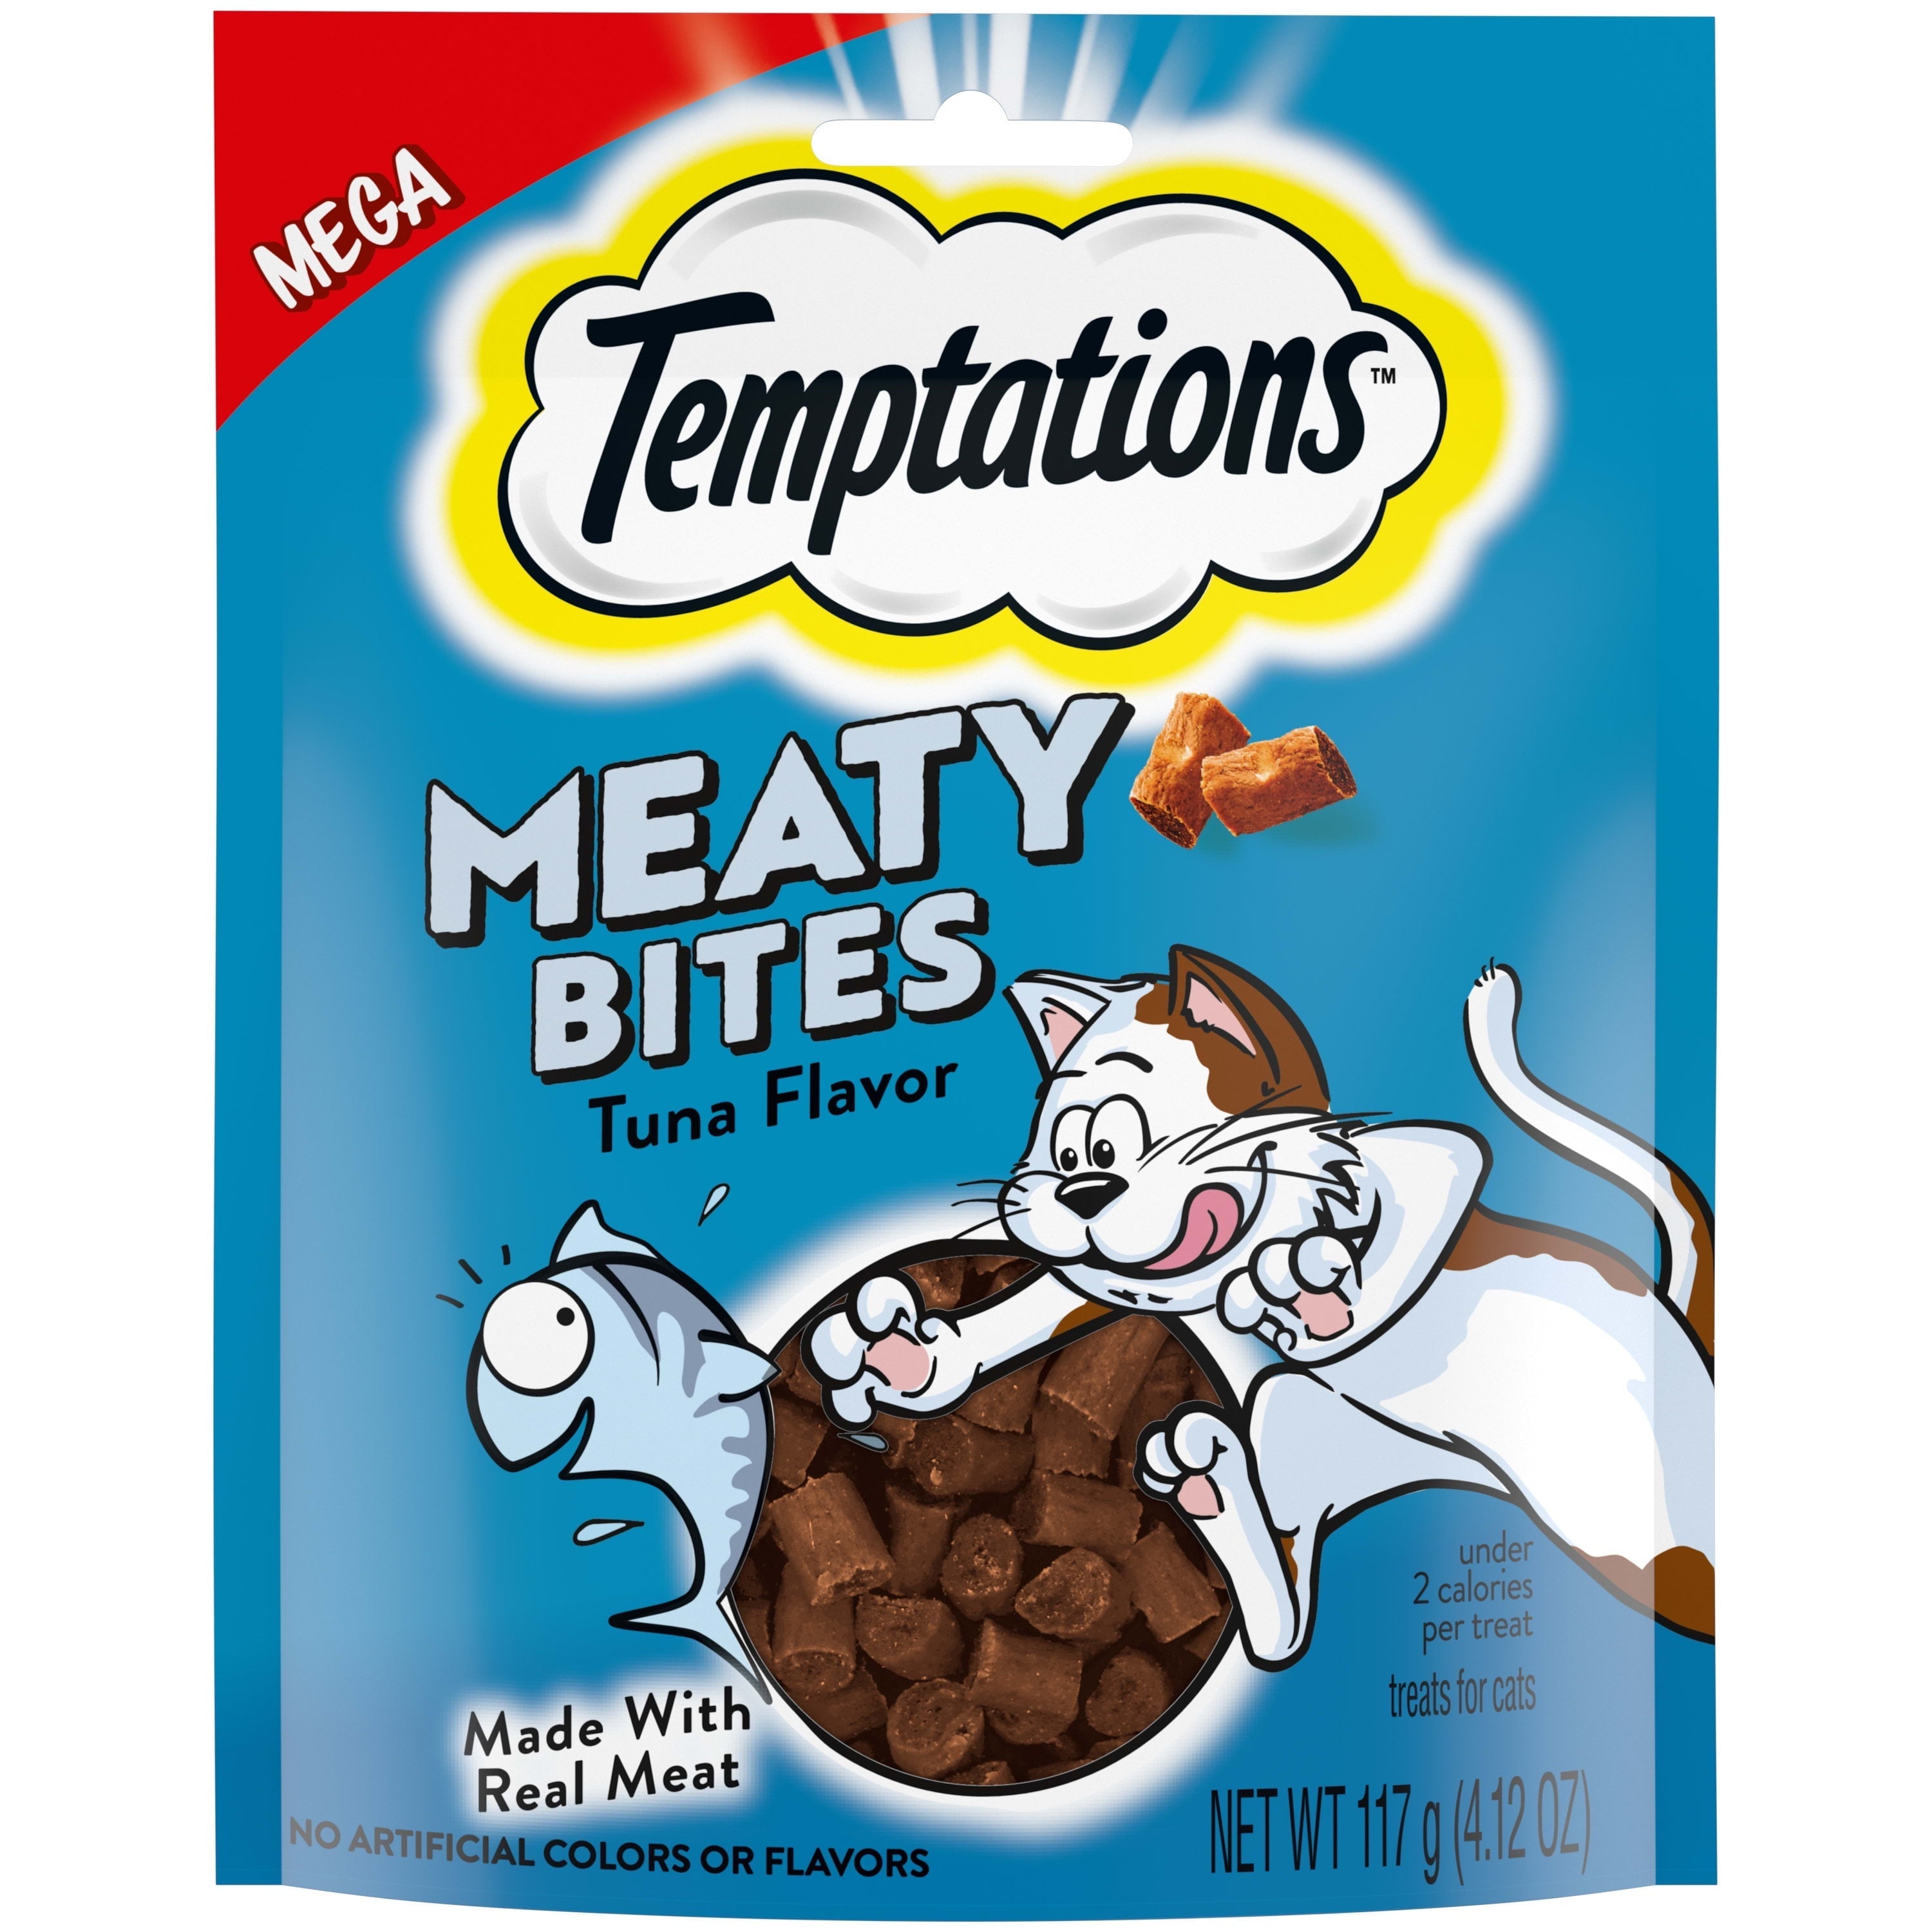 Wholesale prices with free shipping all over United States TEMPTATIONS Meaty Bites, Soft and Savory Cat Treats, Tuna Flavor, 4.12 oz. Pouch - Steven Deals